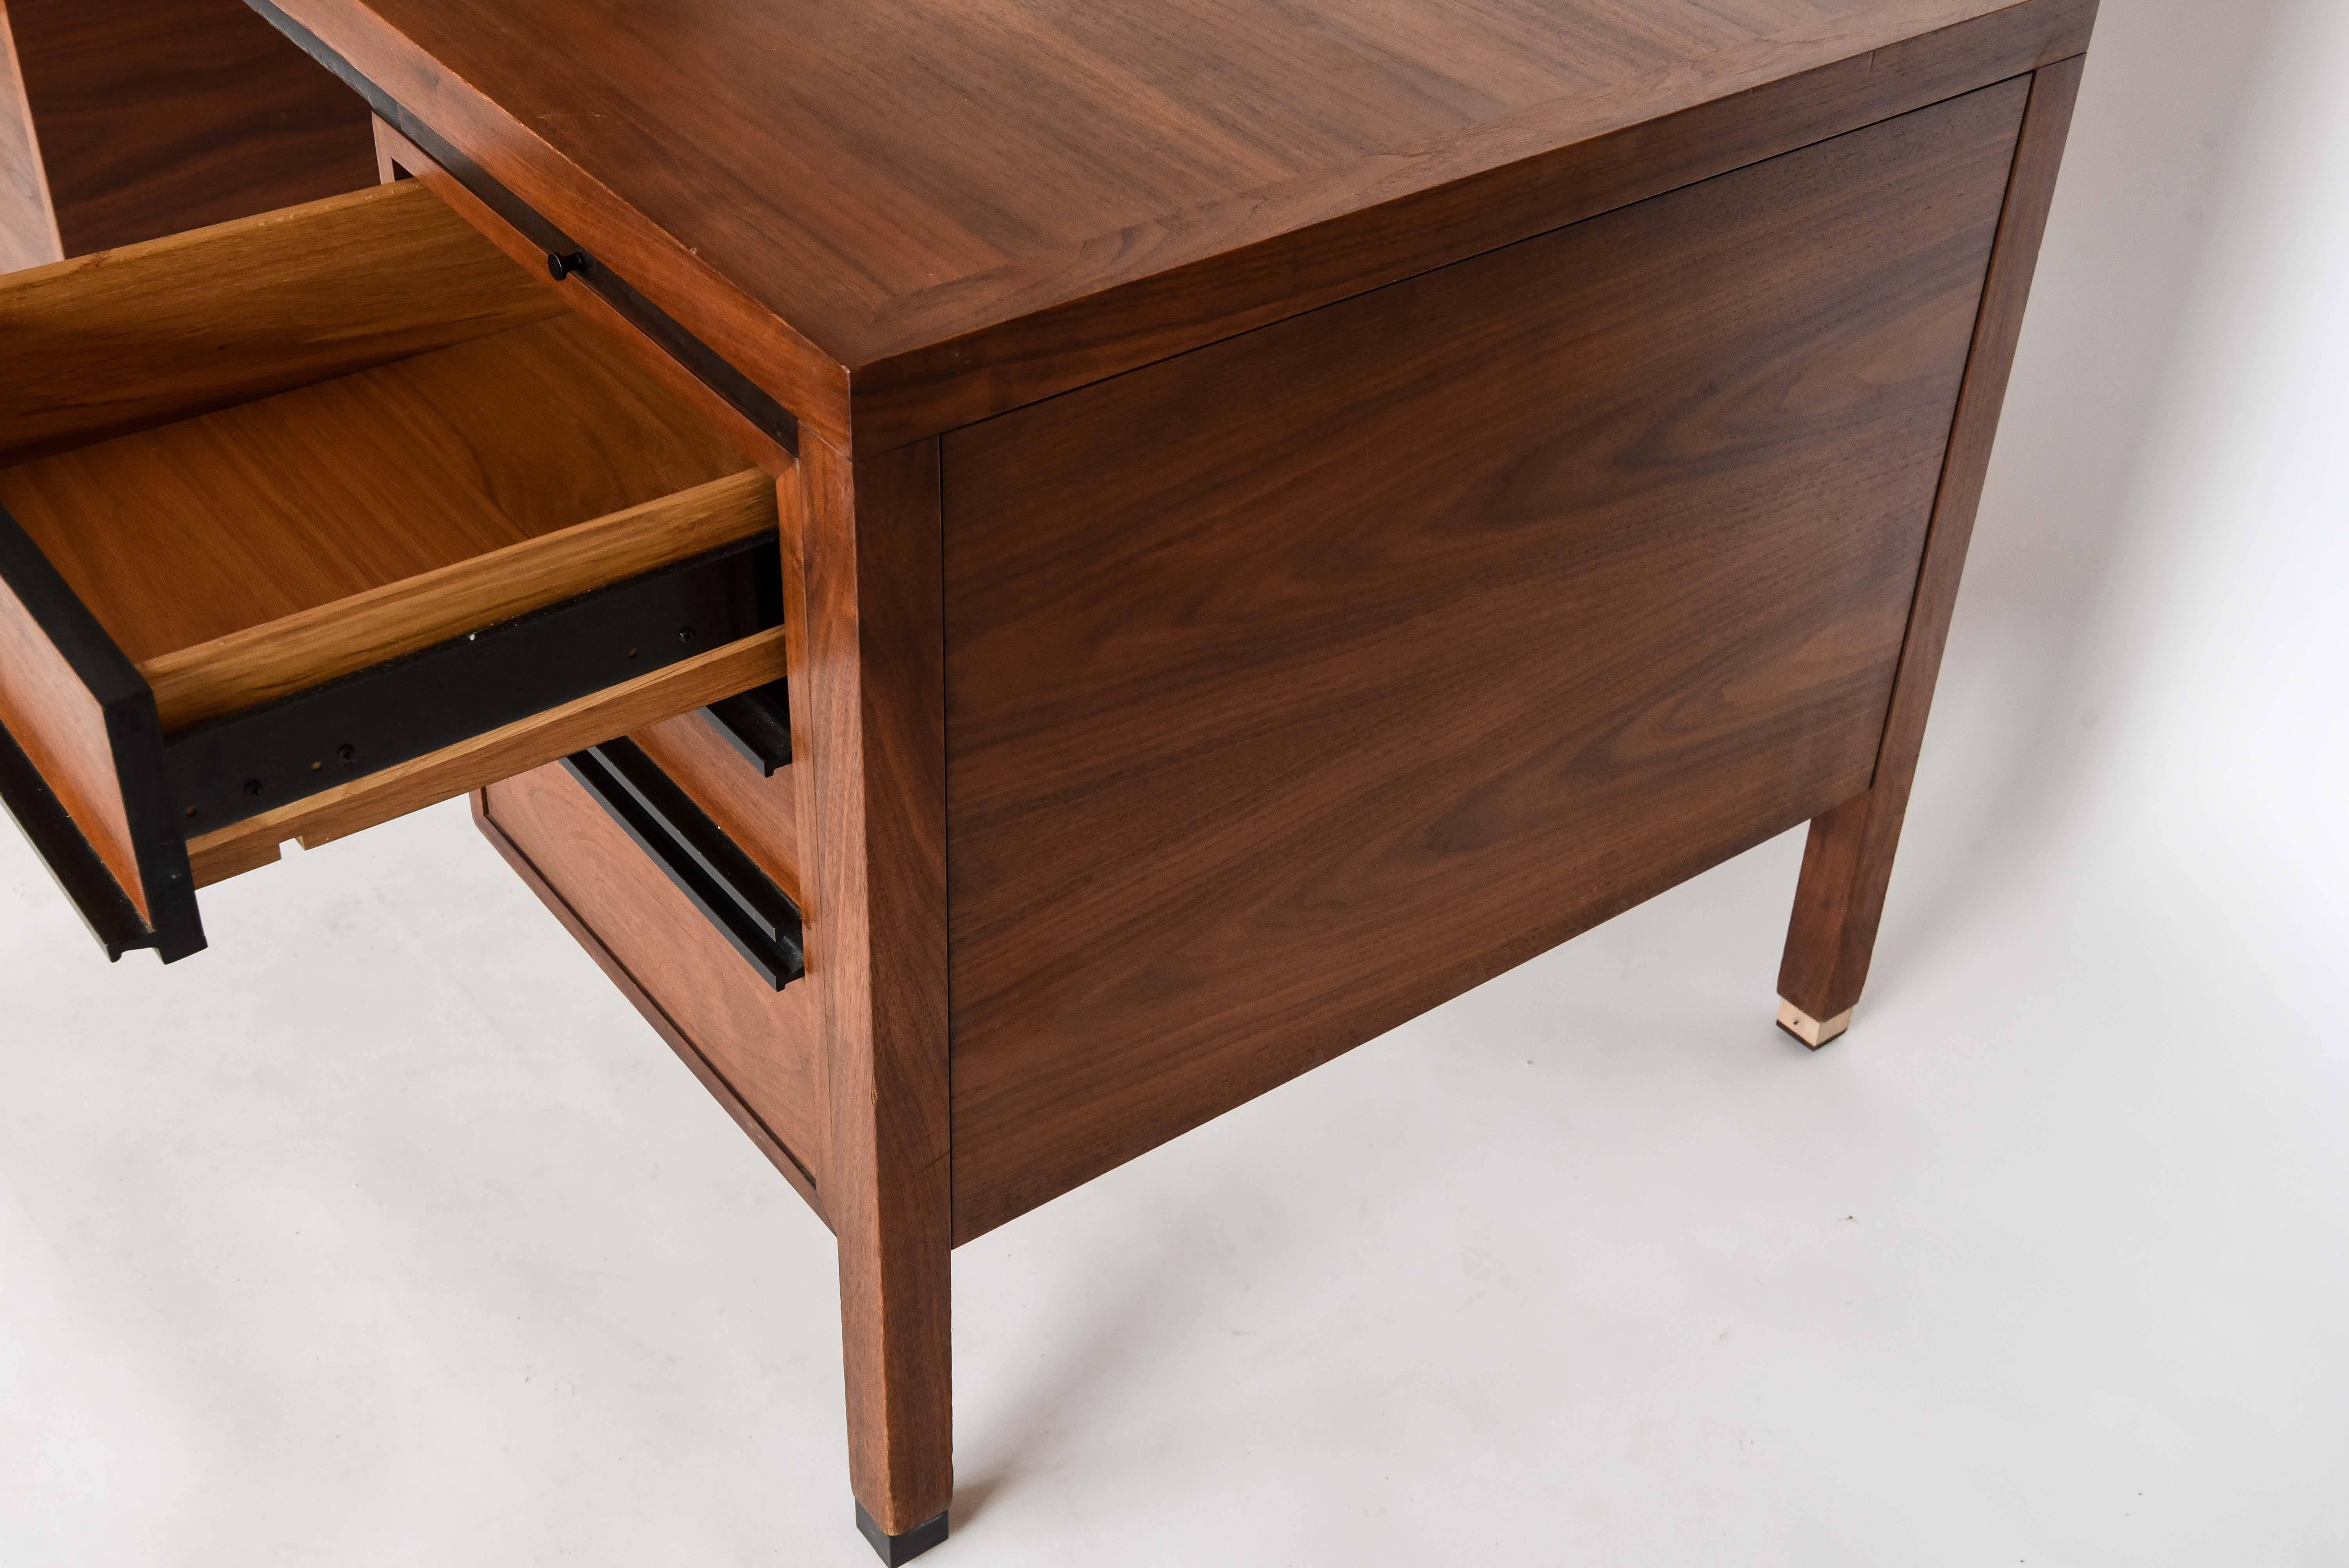 American Directional for Calvin Furniture Co. Attributed to Paul McCobb Midcentury Desk